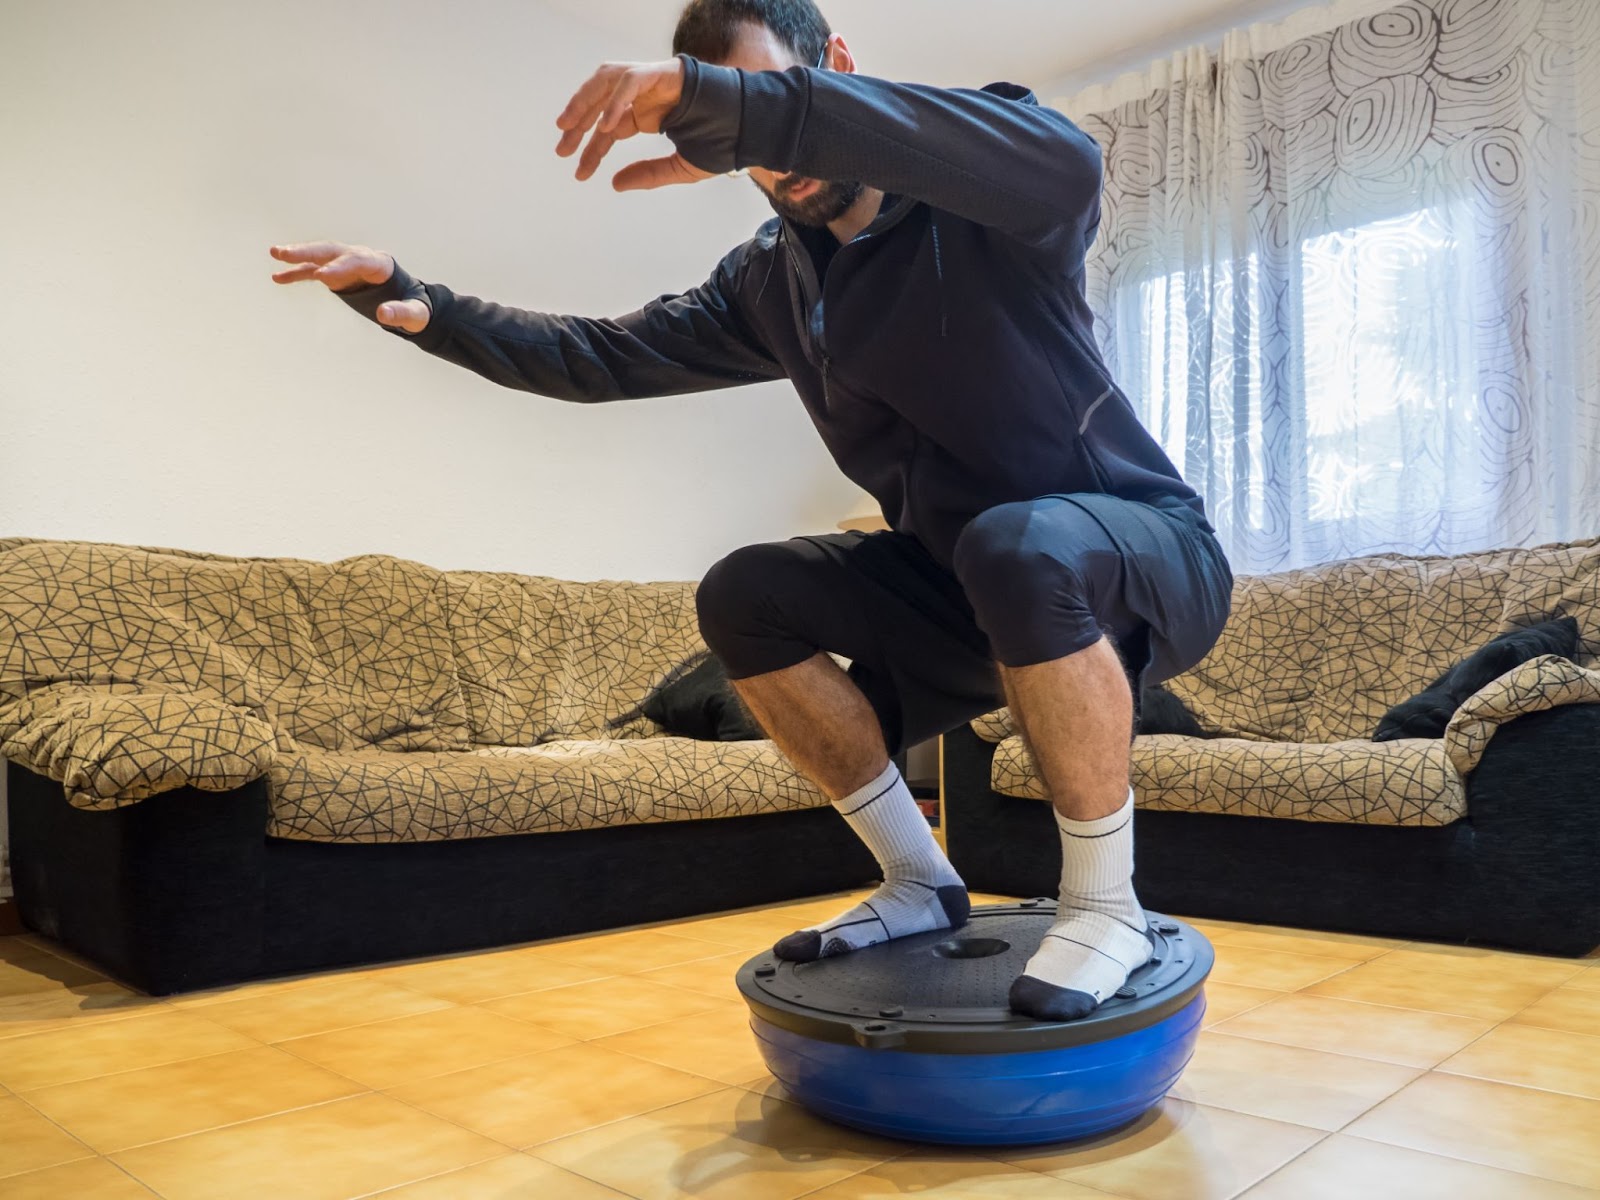 Bearded man in a deep squat on his BOSU ball in his living room.